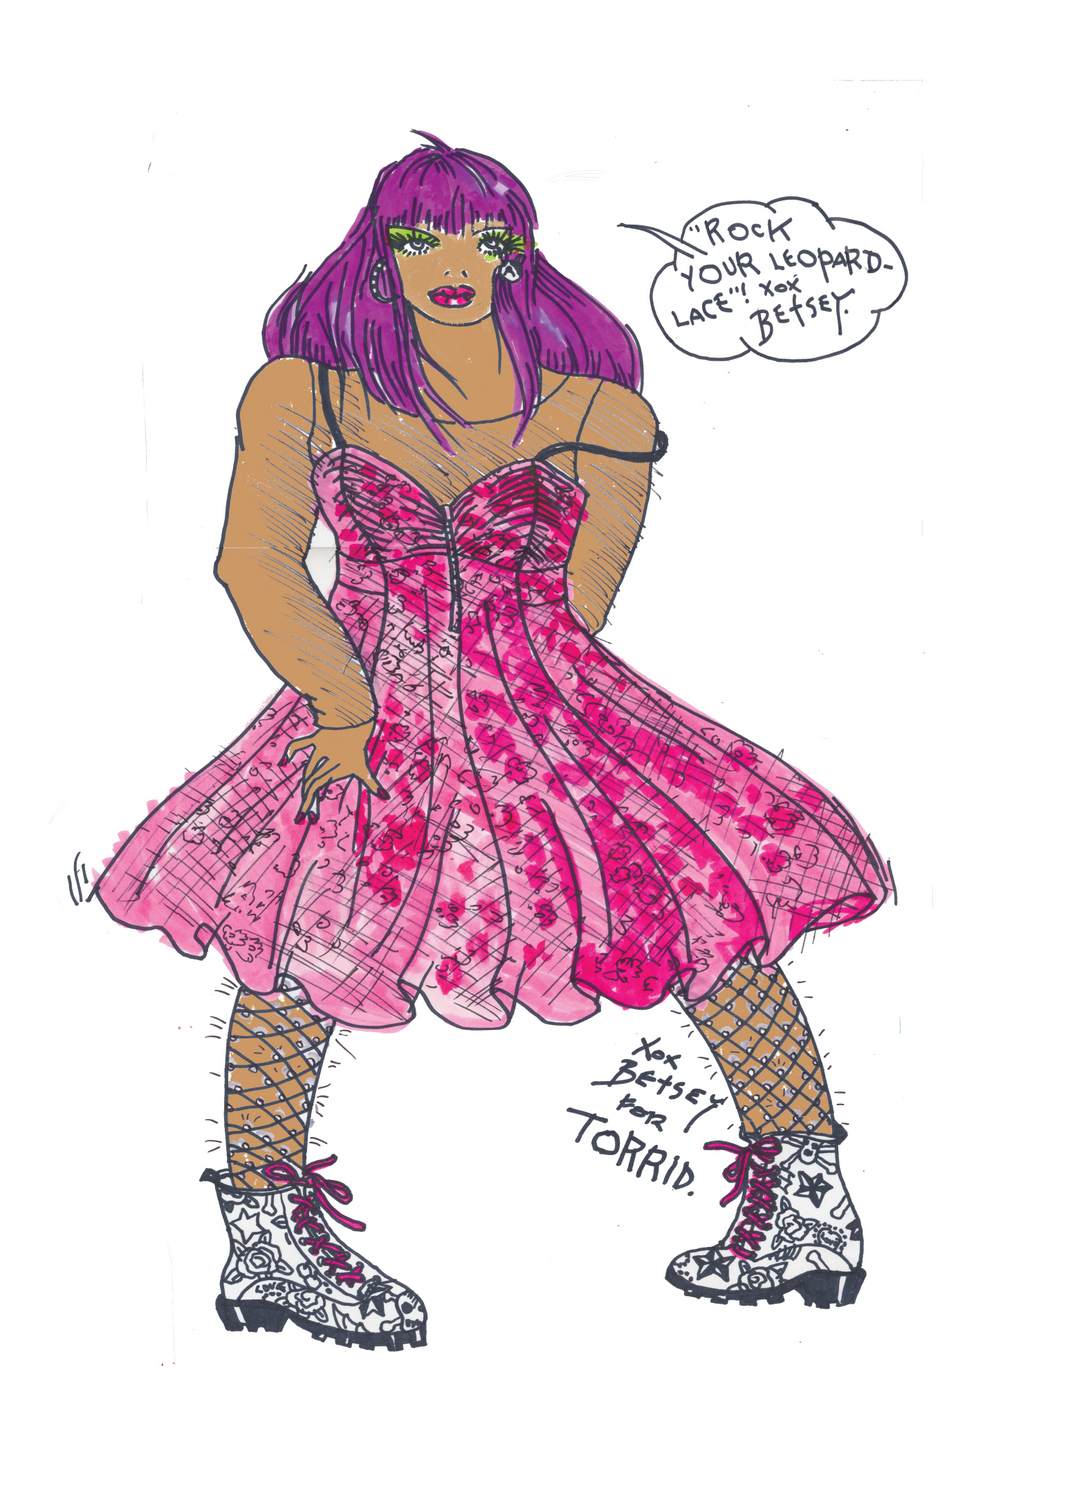 Torrid Meets Betsey Johnson Collection- Sketch